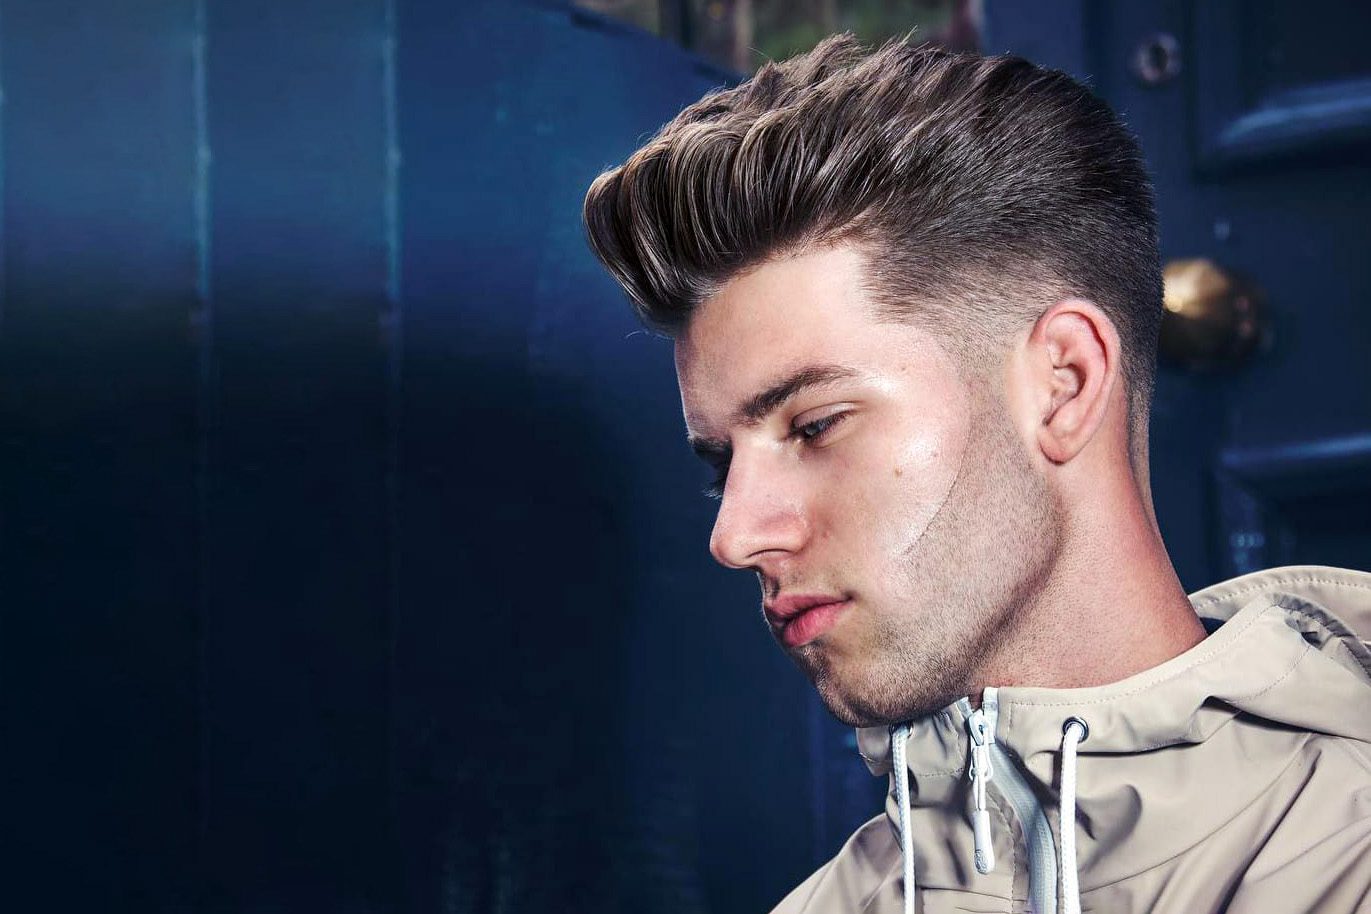 Shaved Side Hairstyles Men Can Try in 2022  All Things Hair PH